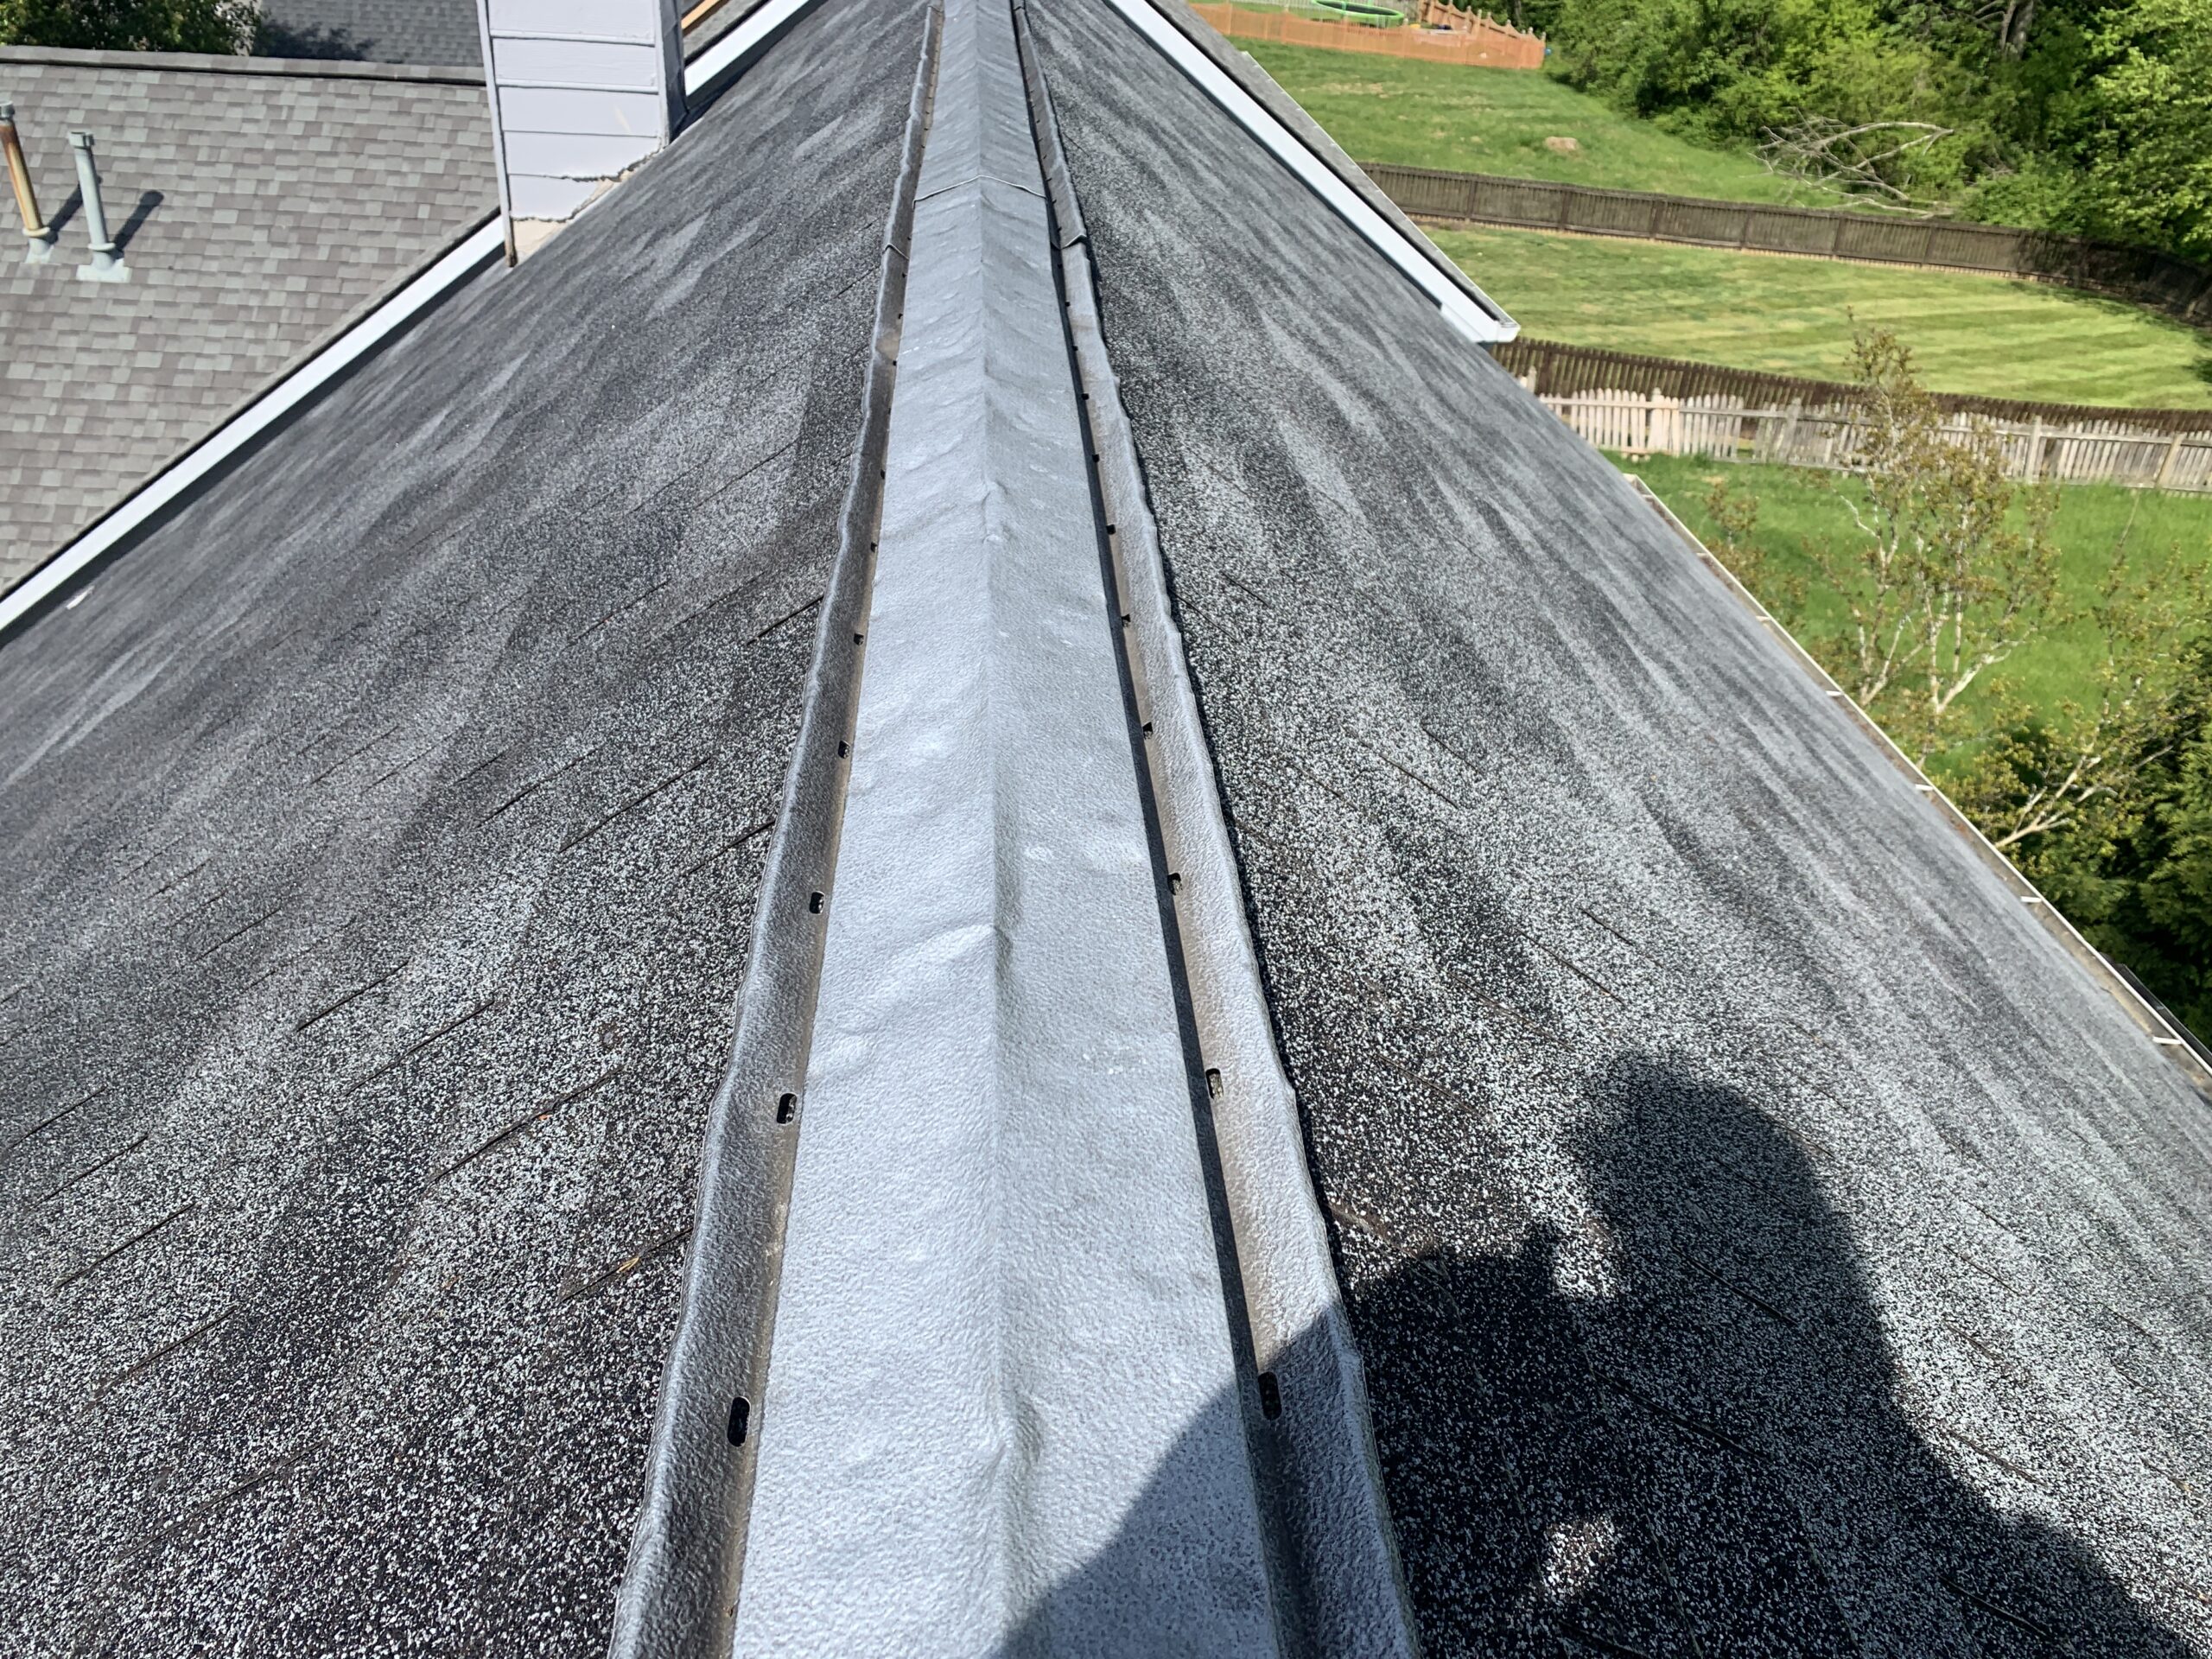 This image shows large dents and perforations on the metal ridge cap and shingles